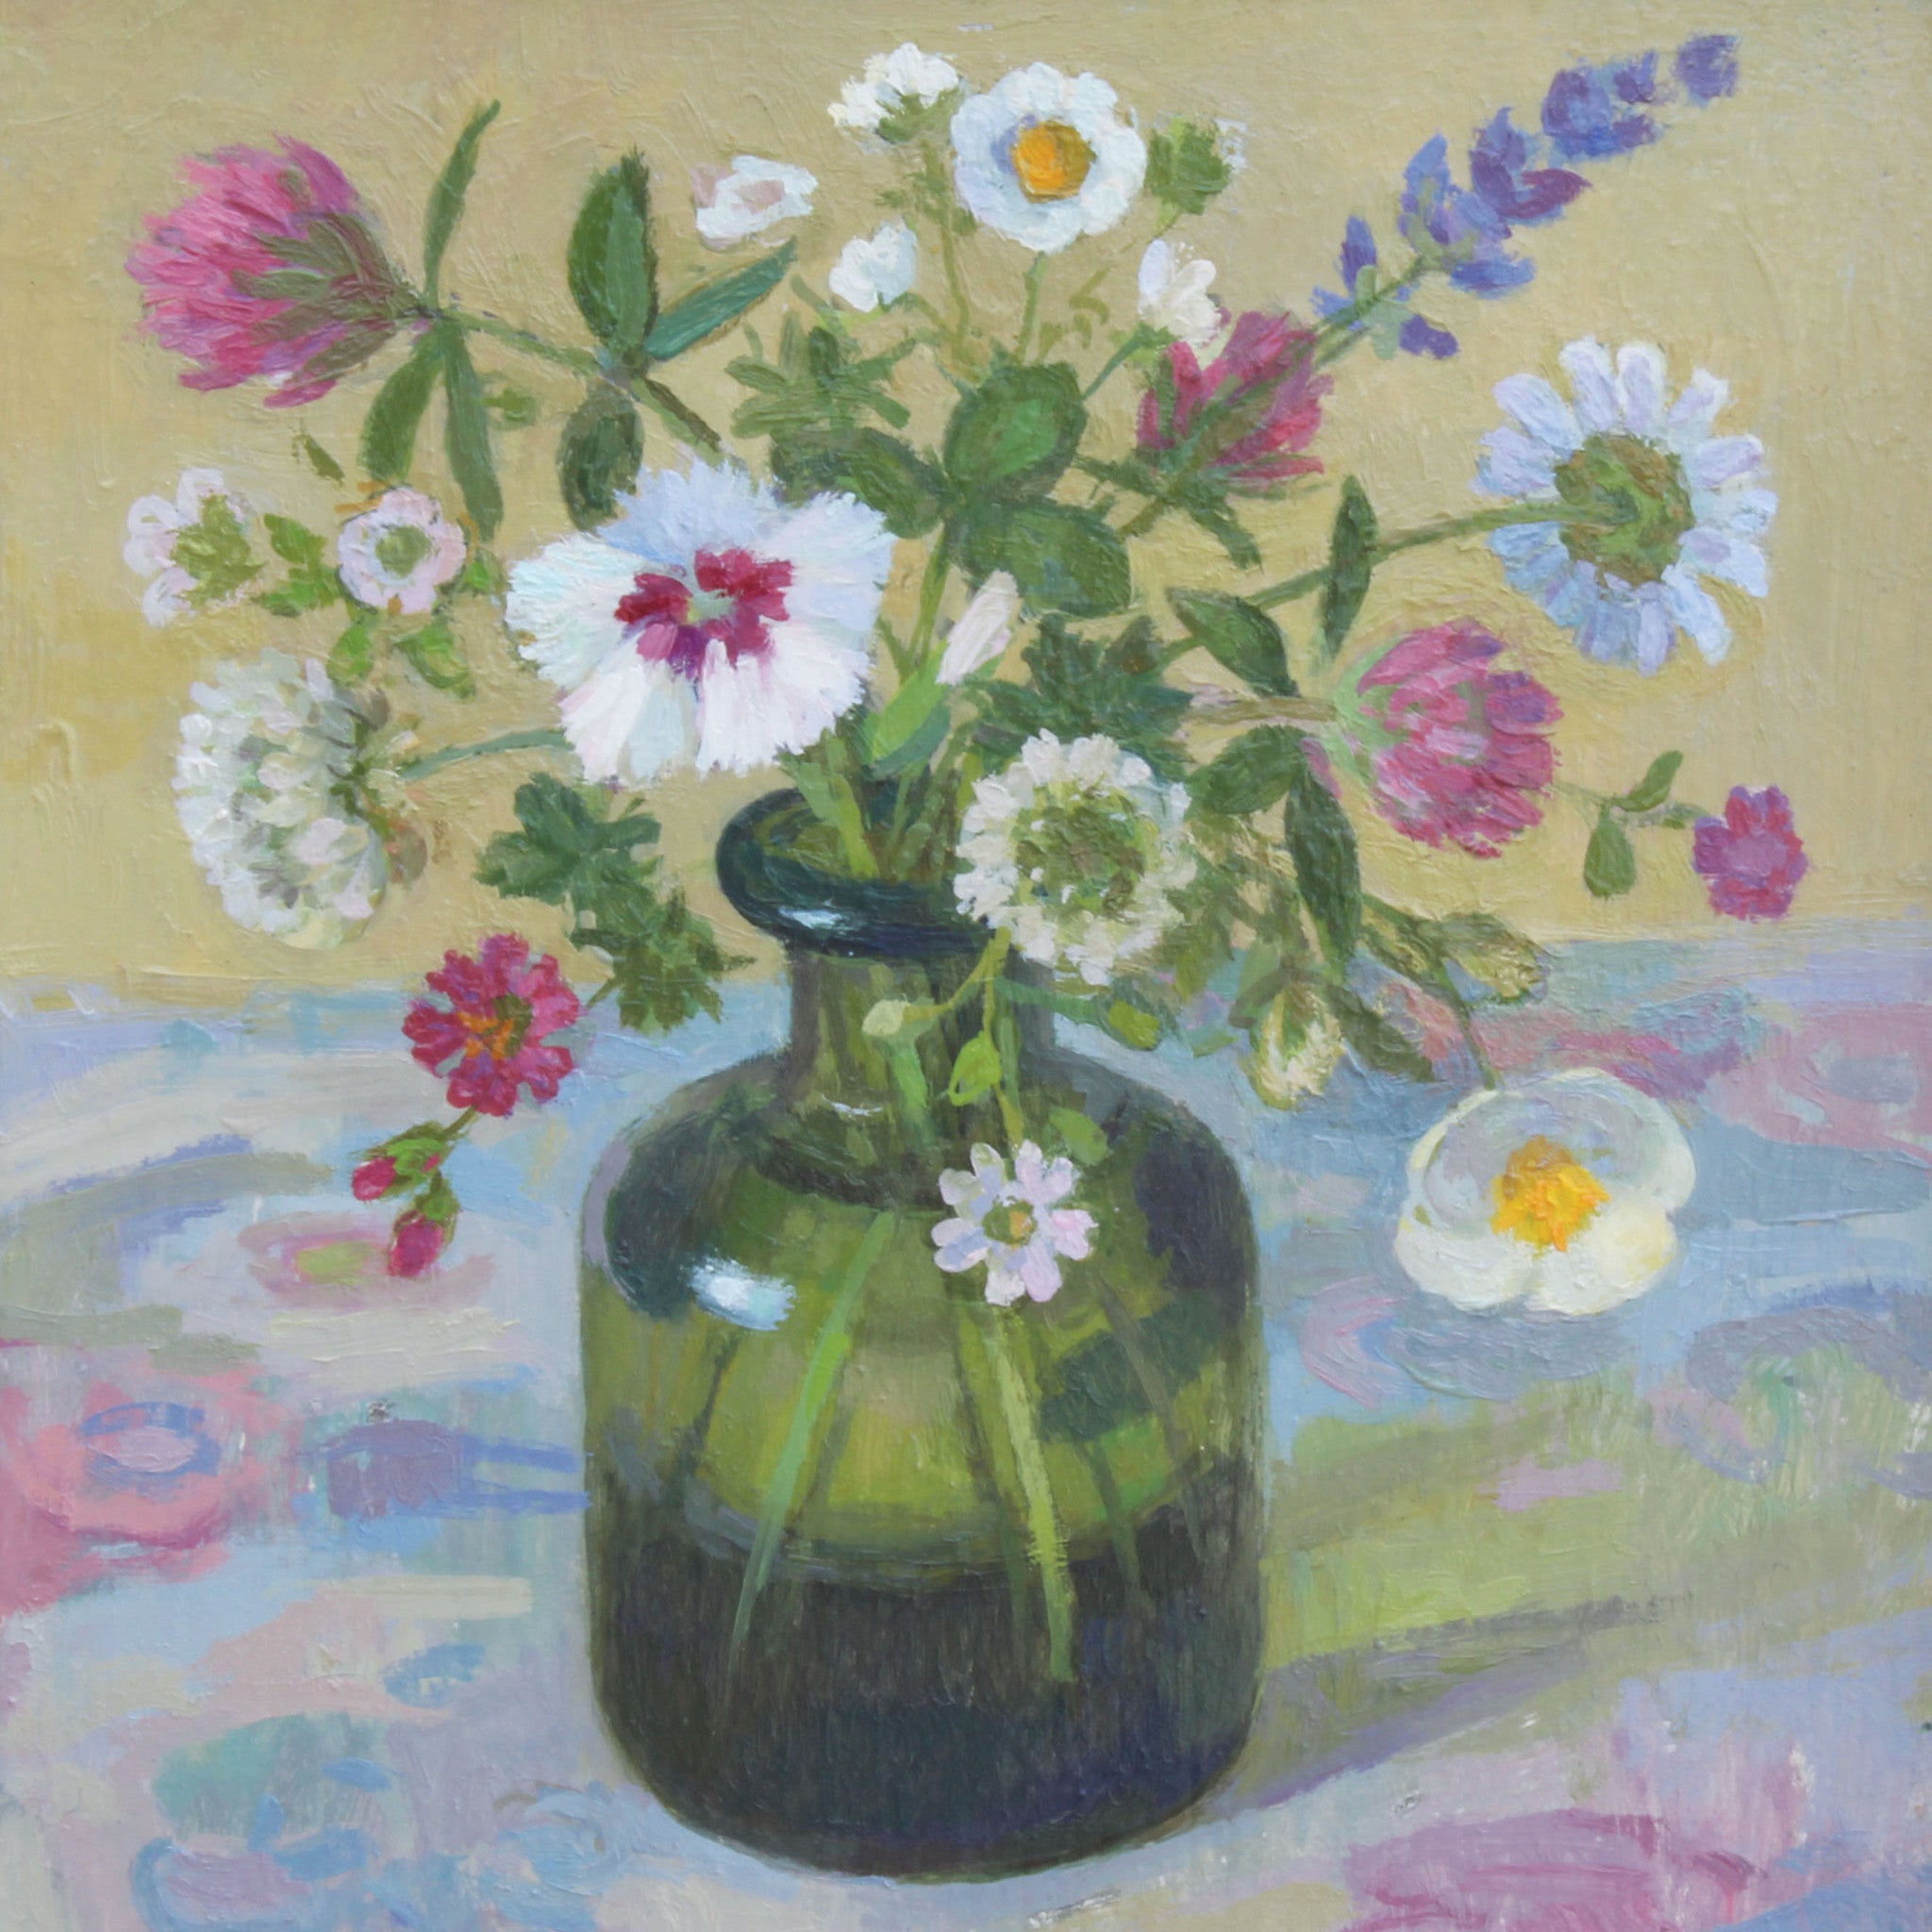 Summer Flowers by Diana Calvert, Fine Art Greeting Card, DRP Award, Oil painting, Green vase with summer flowers